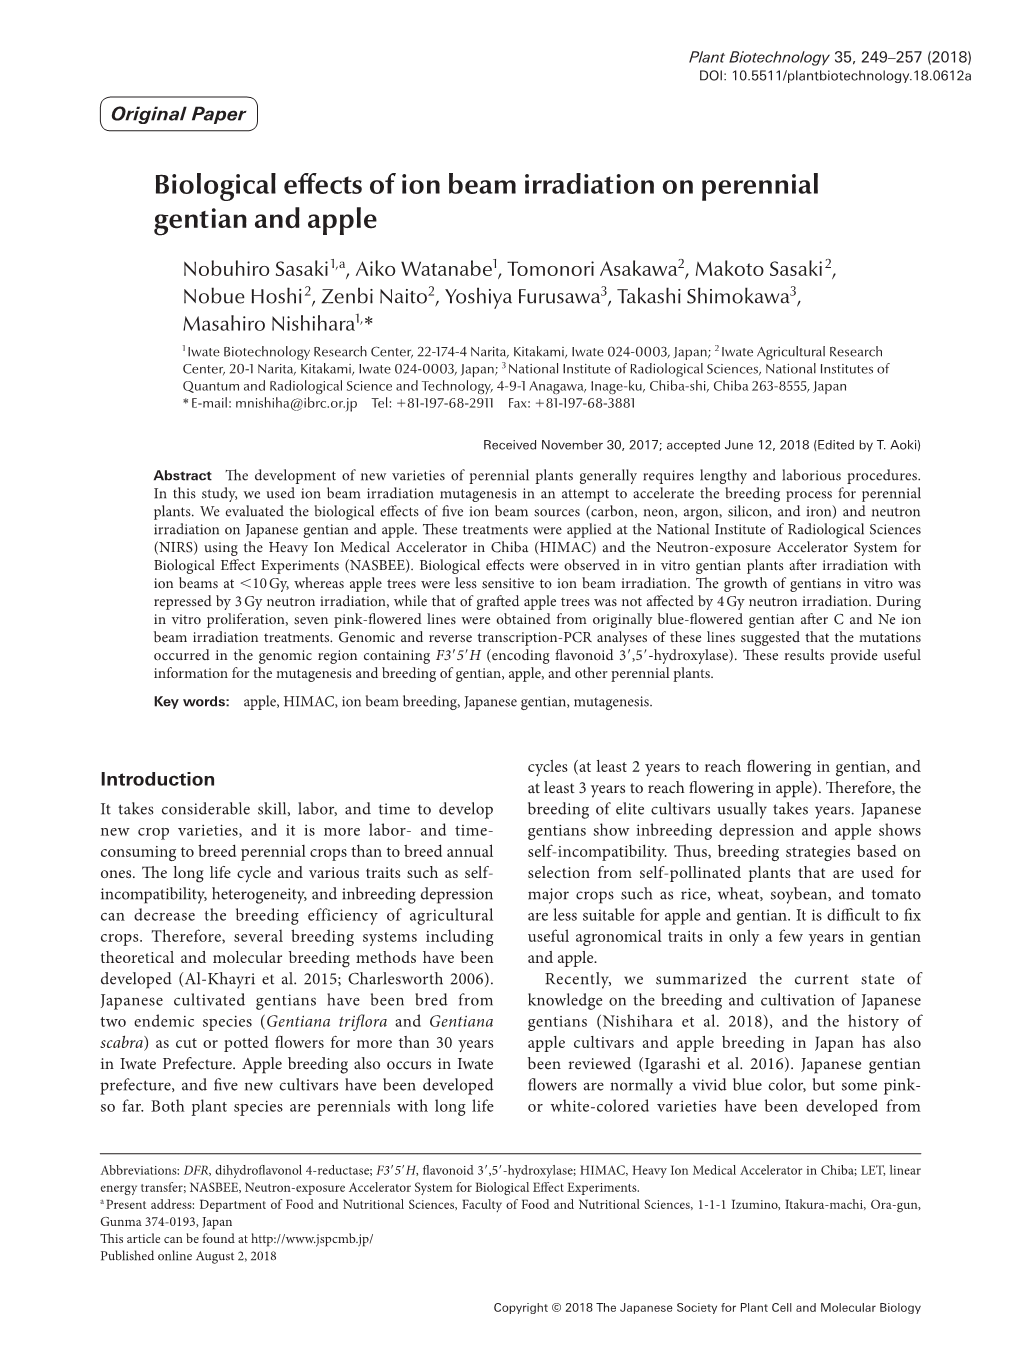 Biological Effects of Ion Beam Irradiation on Perennial Gentian and Apple